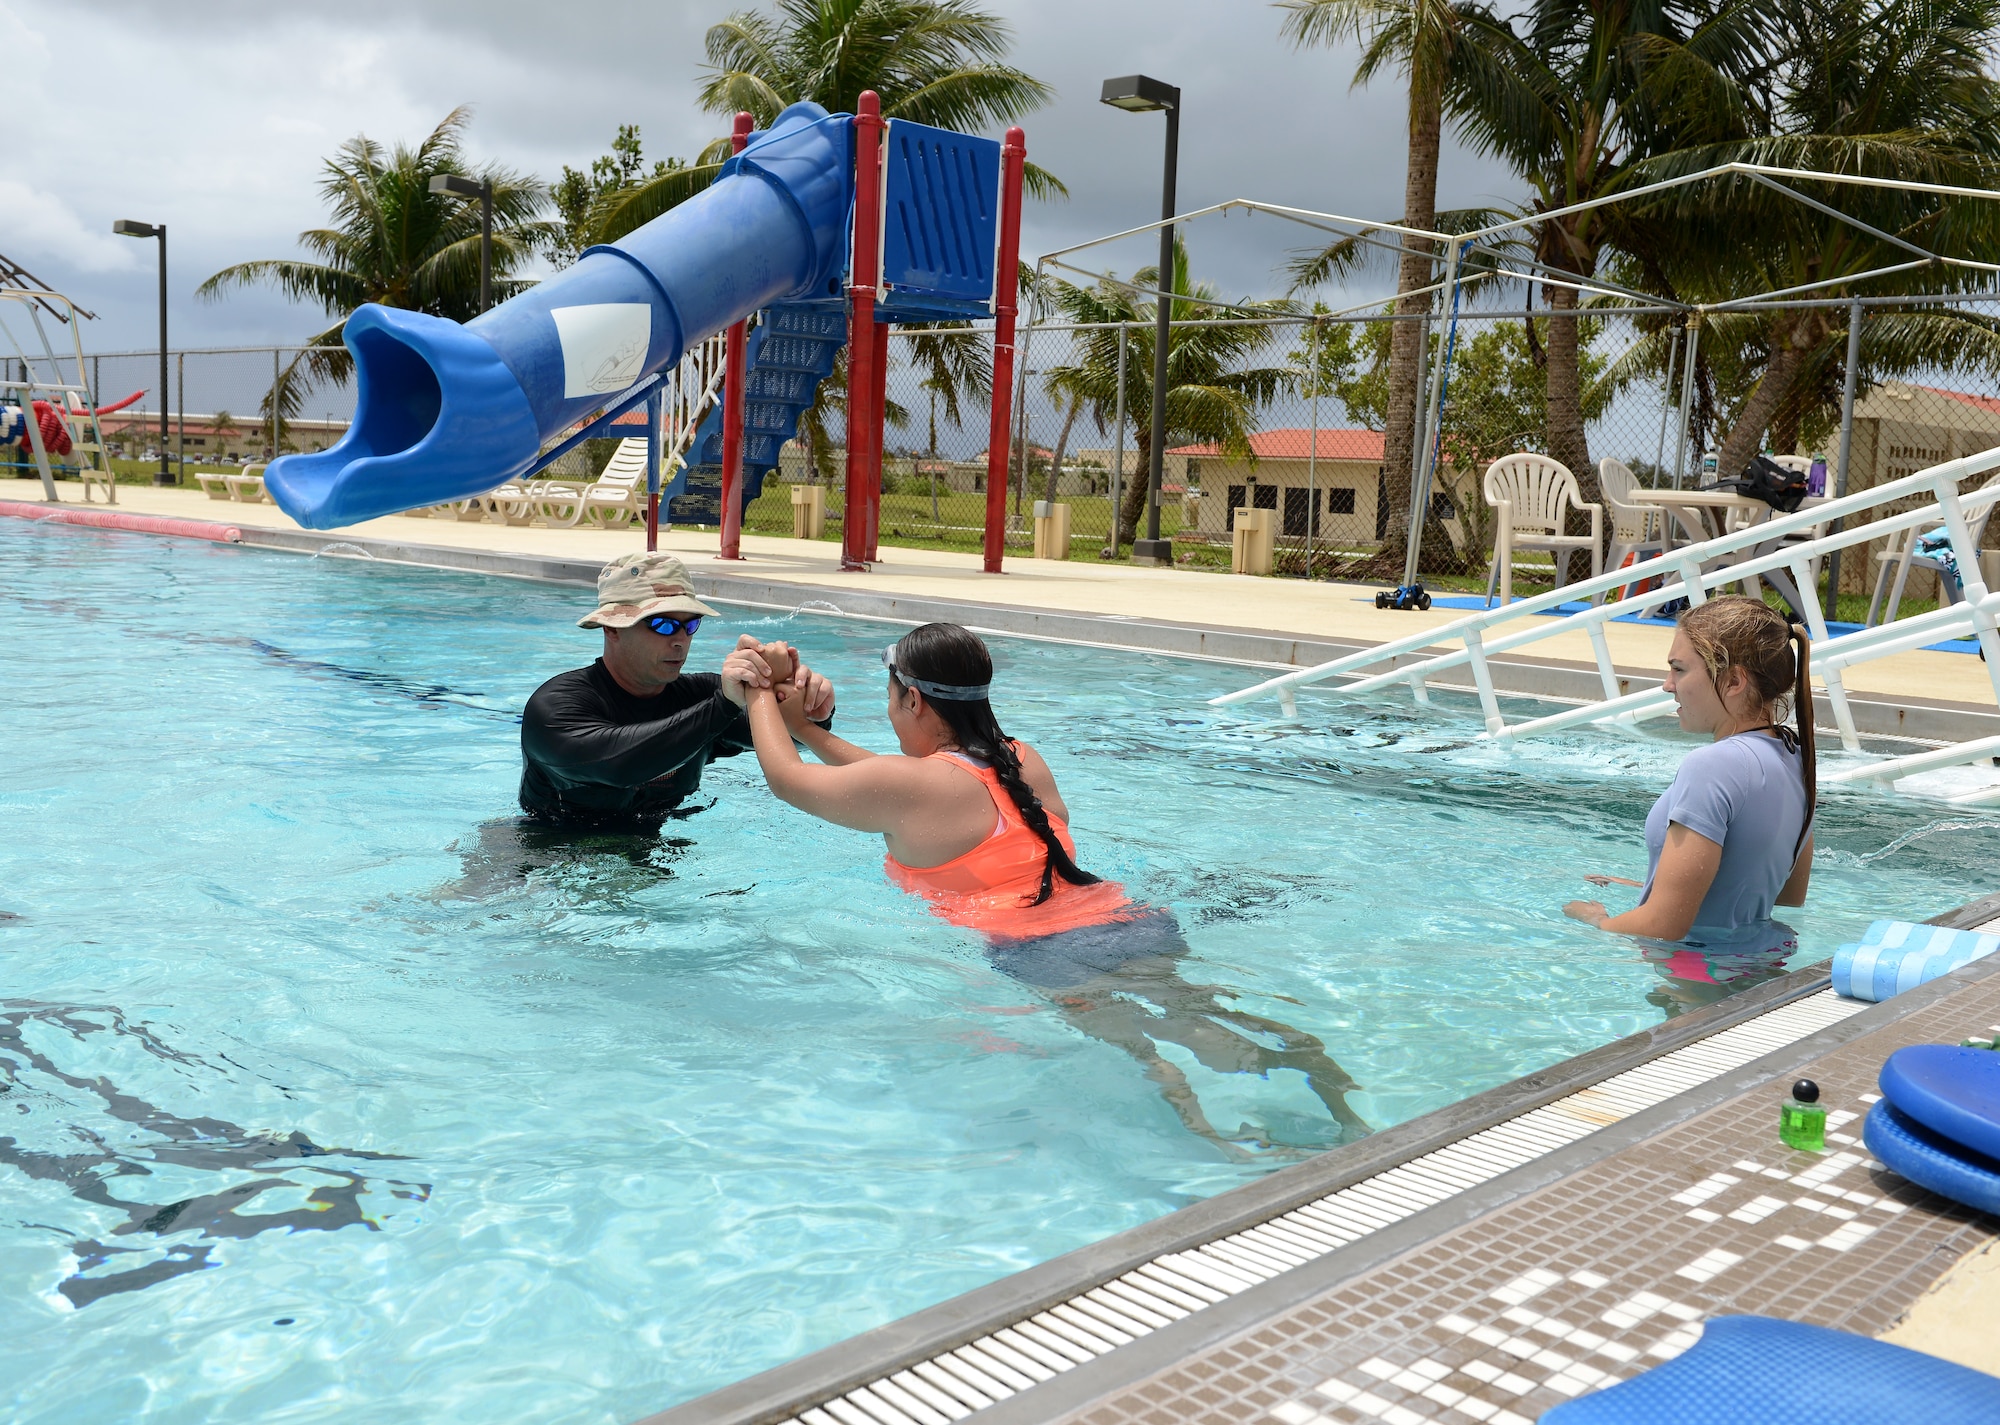 Maj. Michael Curtin, 36th Medical Operations Squadron Health Promotion Flight commander, instructs a group aquatic class July 7, 2015, at Andersen Air Force Base, Guam.  The class is designed for post-operation patients who need a lower impact exercise. (U.S. Air Force photo by Airman 1st Class Arielle Vasquez/Released)